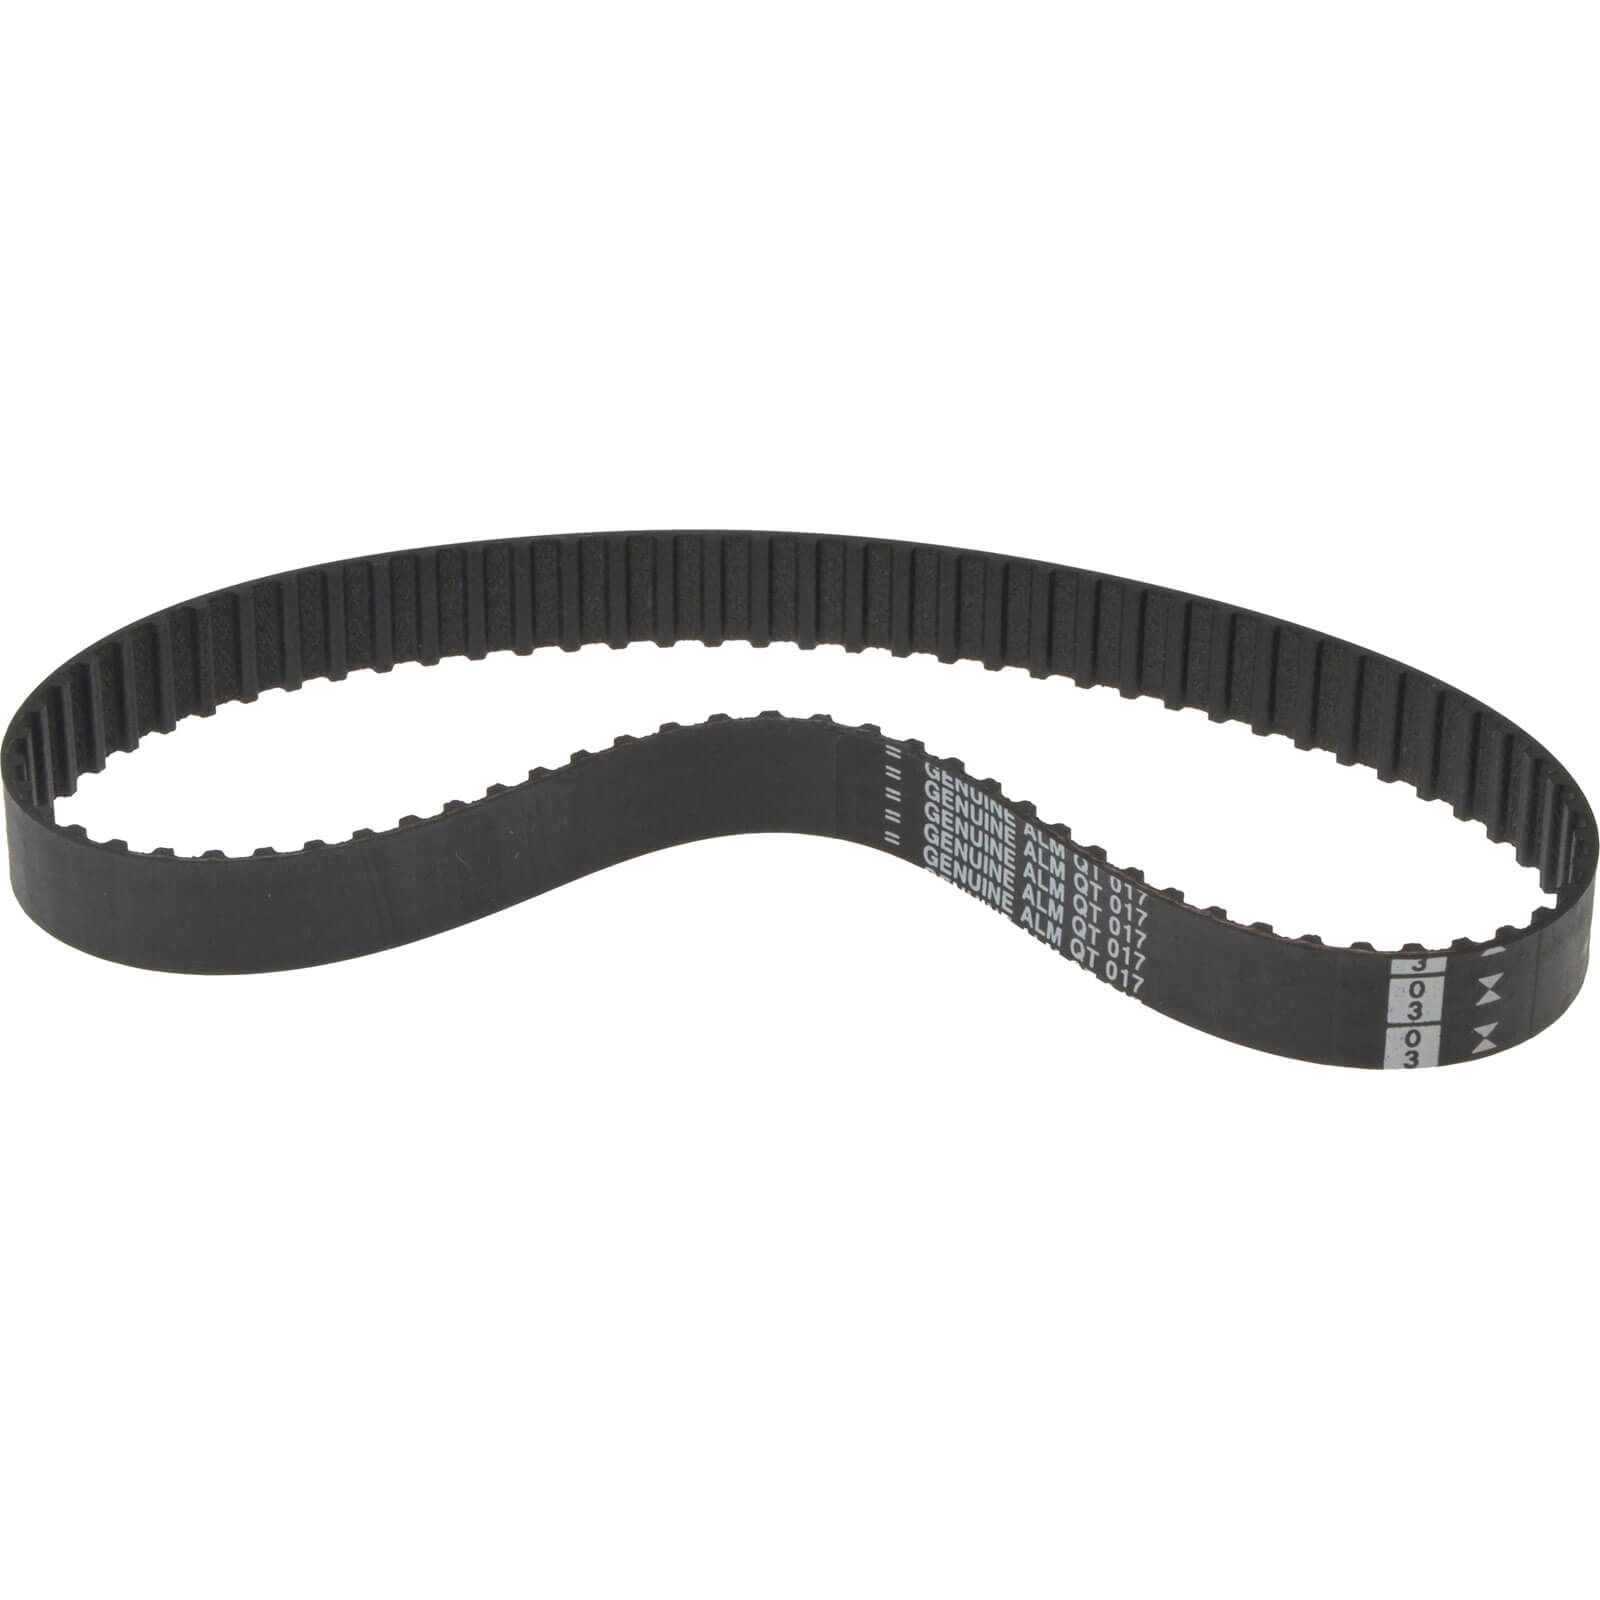 Photo of Alm Qt017 Drive Belt For Qualcast Rear Grass Boxed Lawnmowers